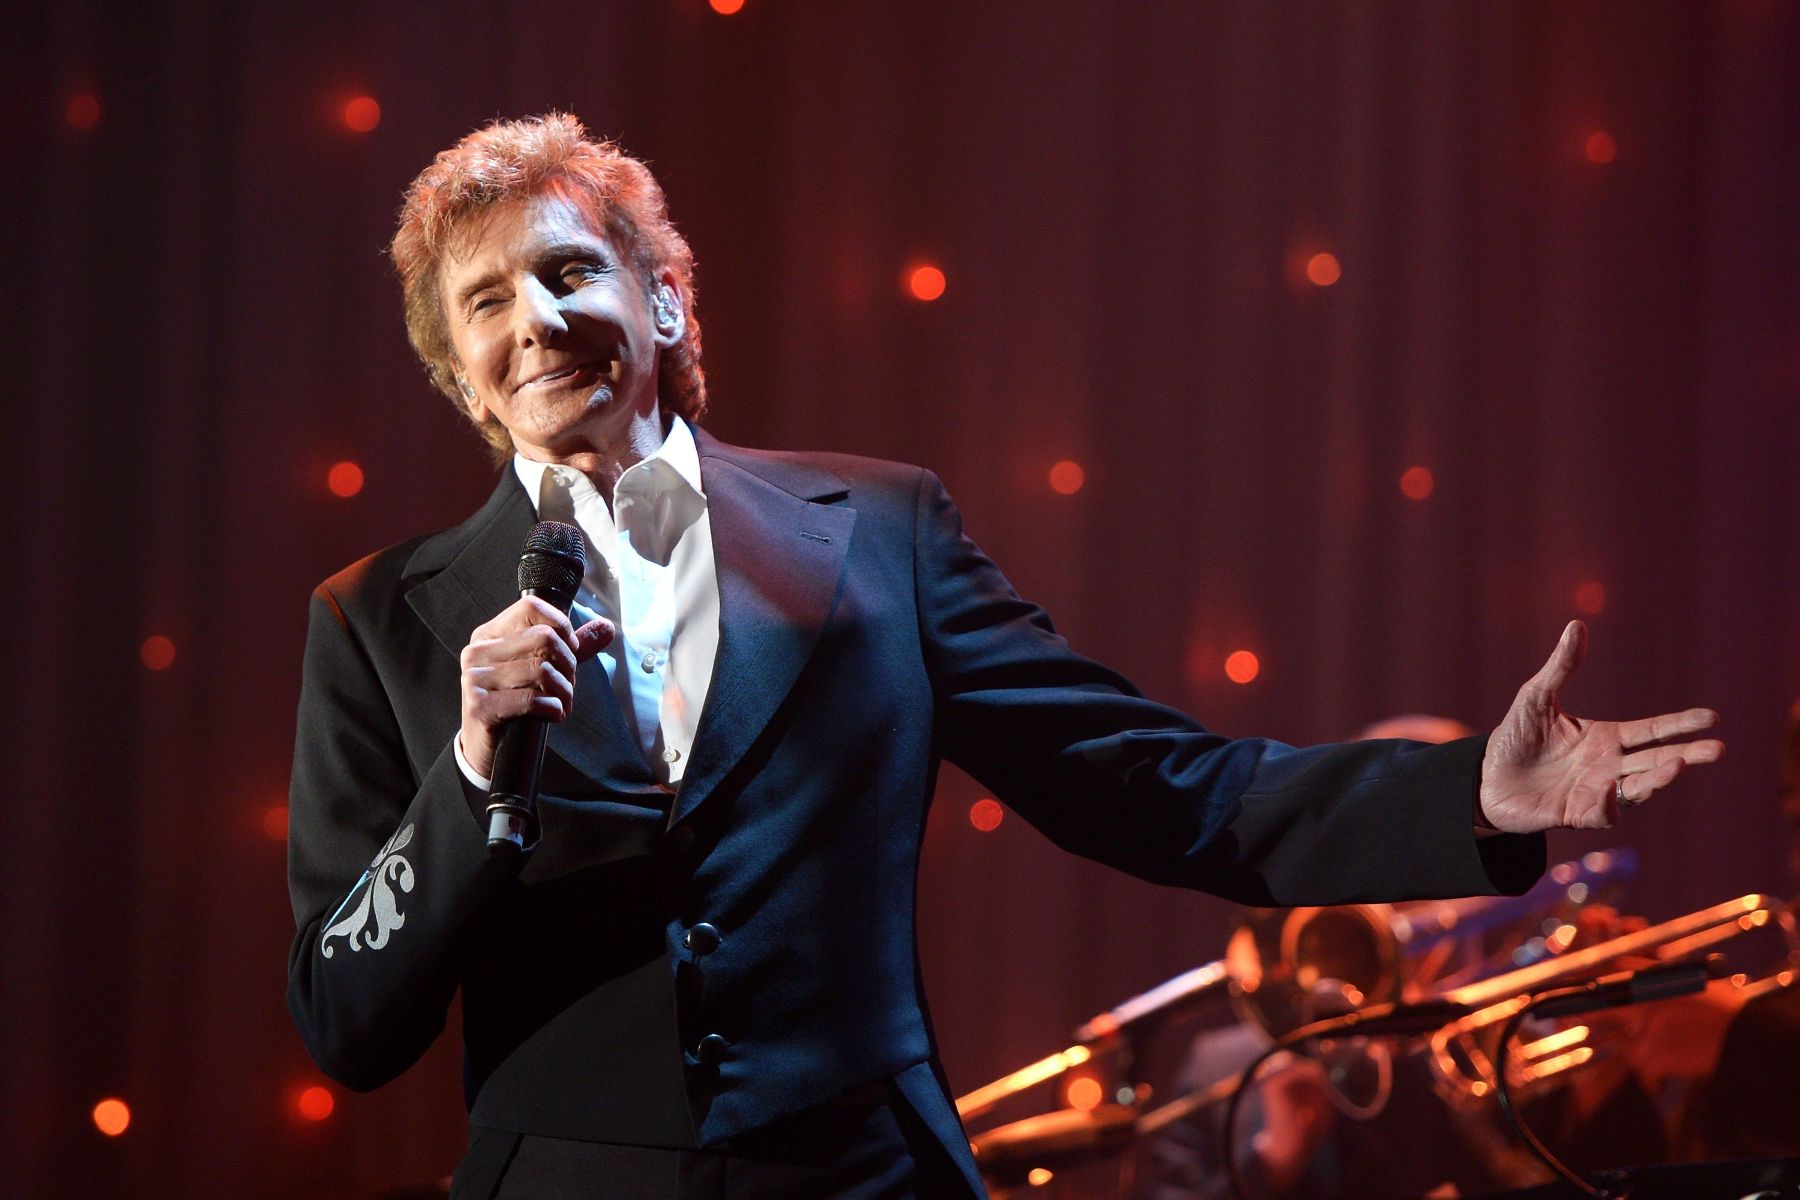 barry manilow